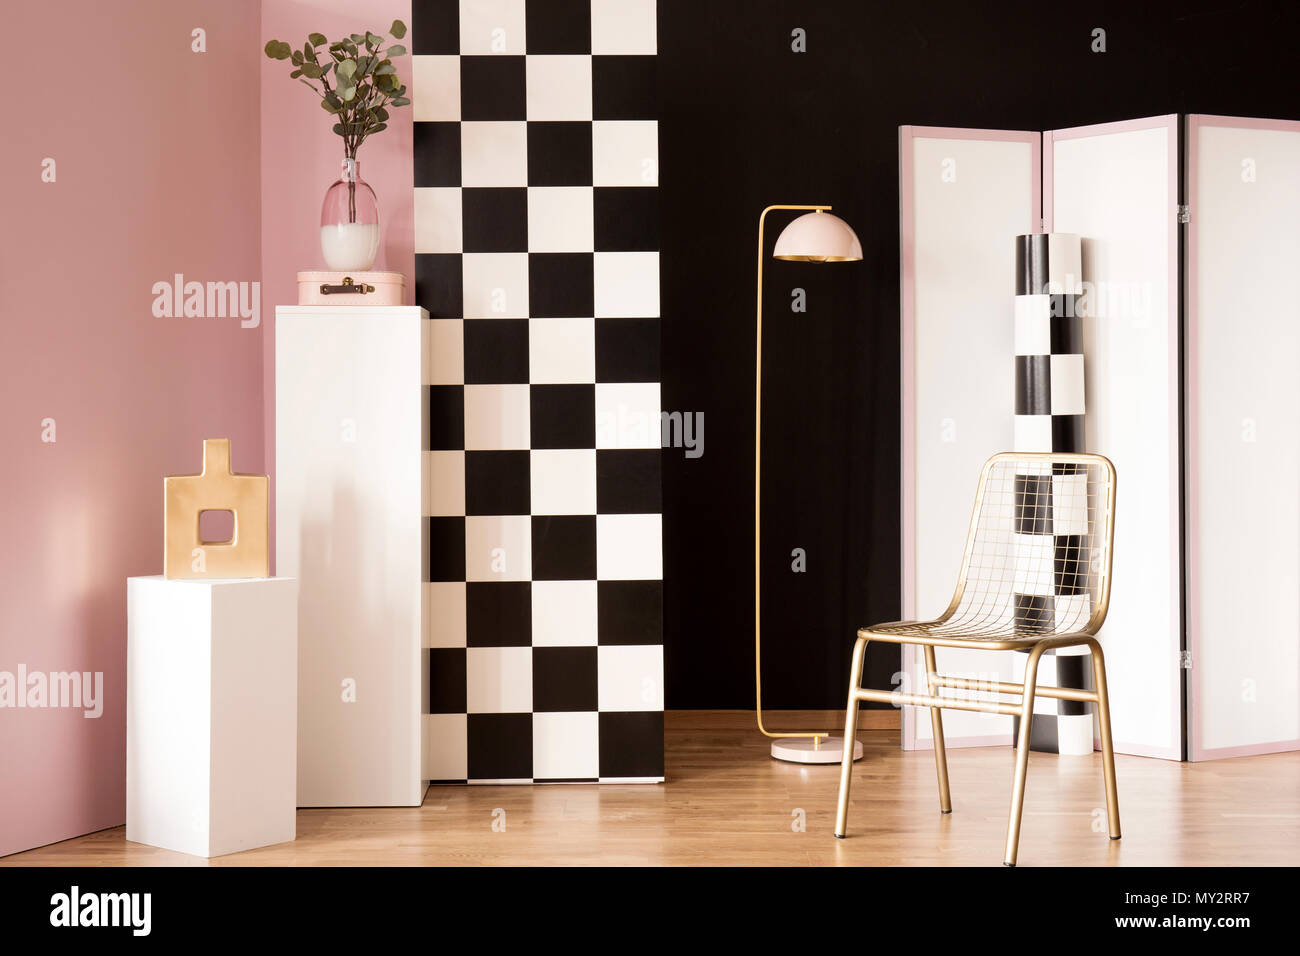 Gold chair next to pink lamp in pastel interior with checkerboard wall and plant on white pedestal Stock Photo